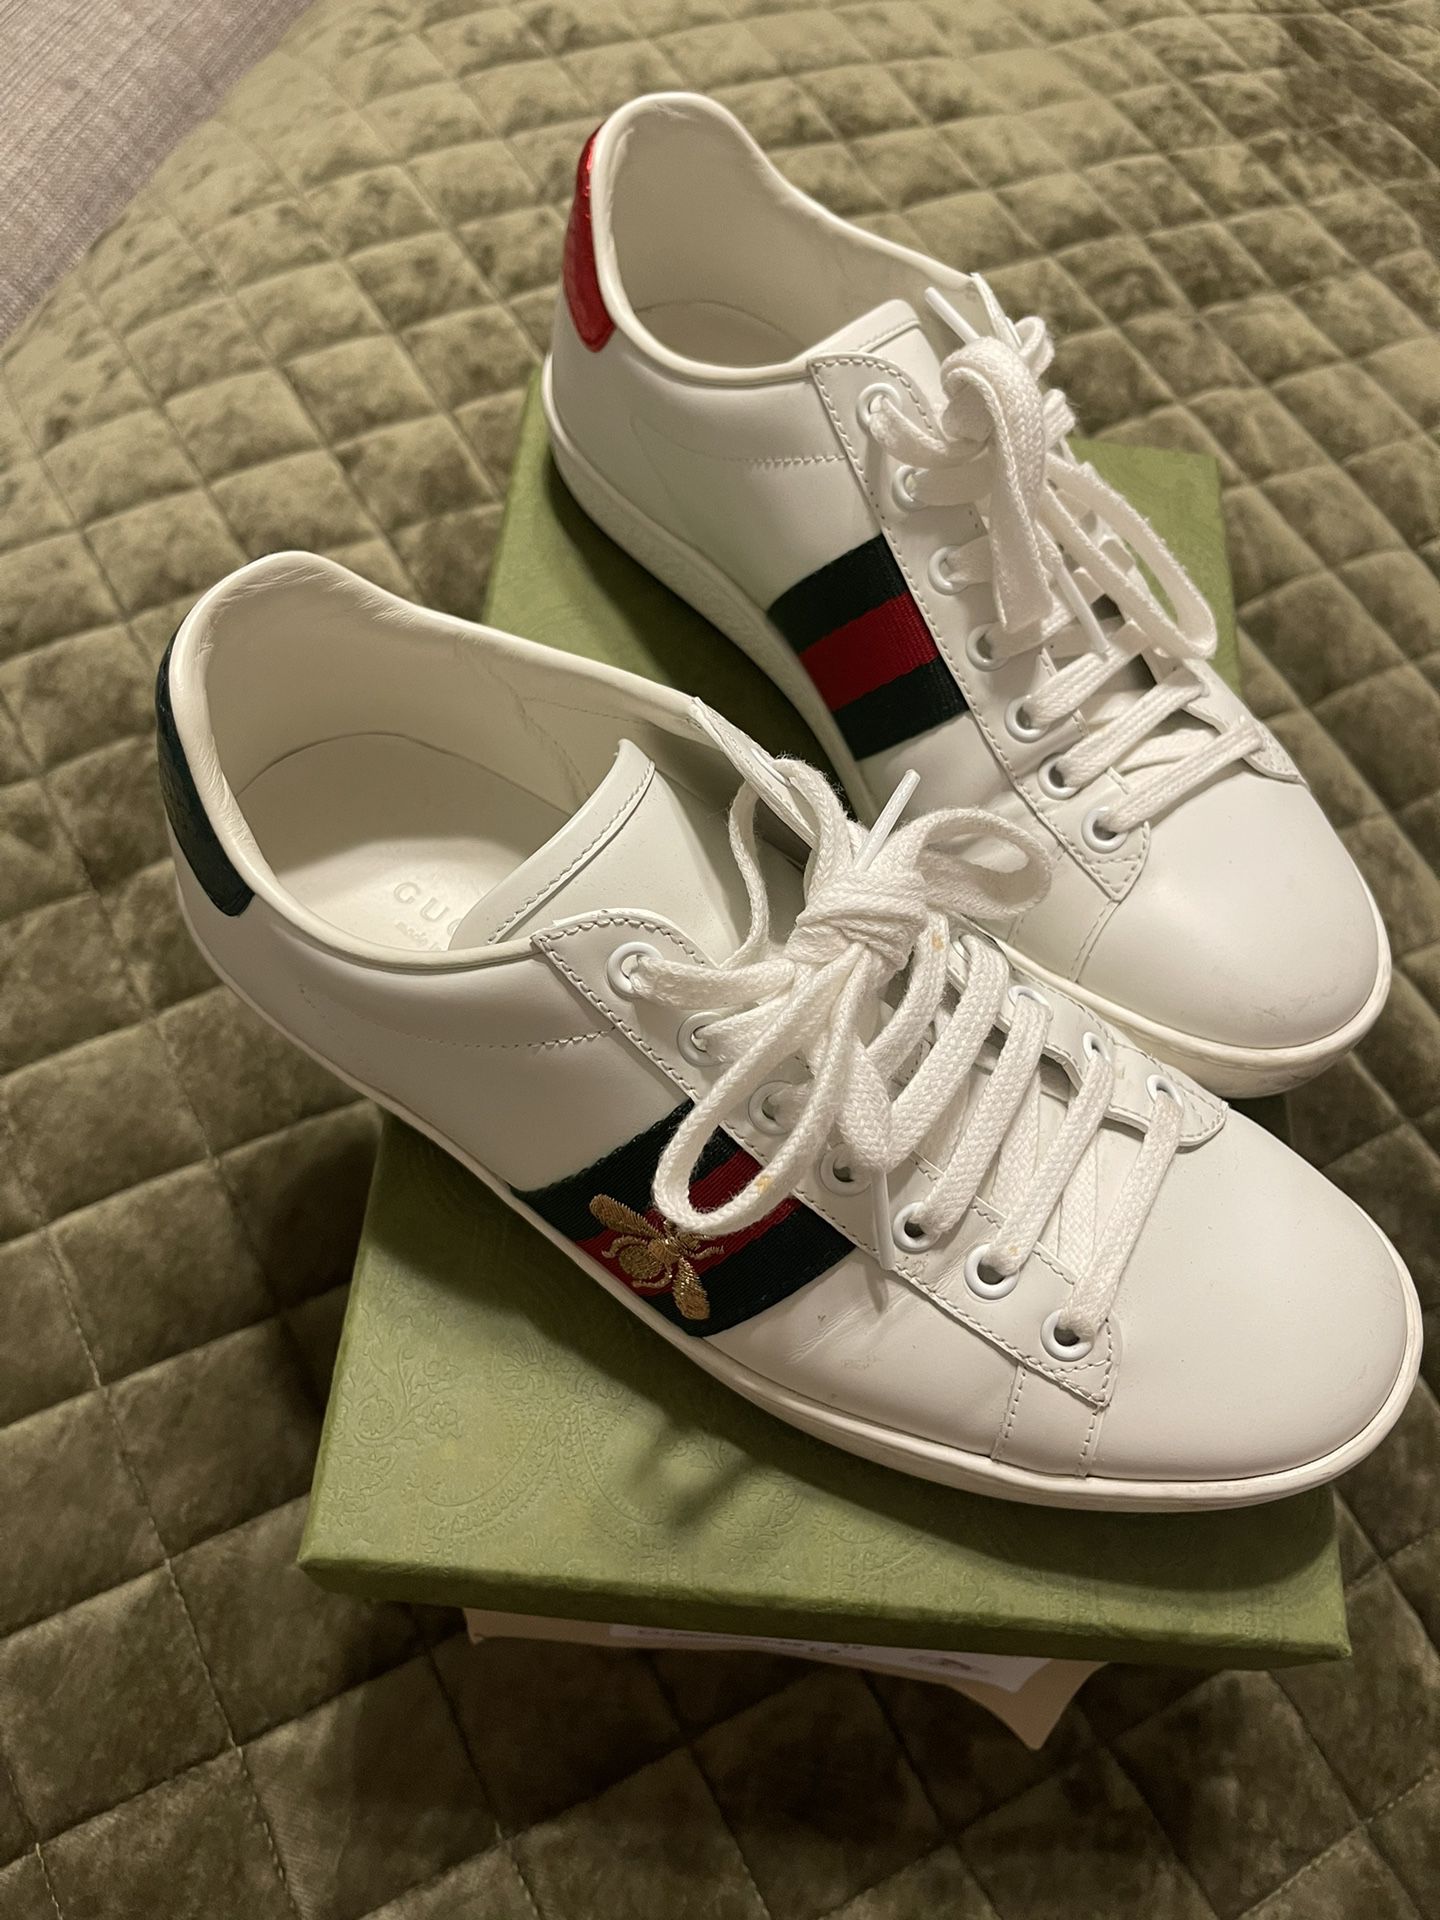 Gucci Women's Ace sneaker with bee